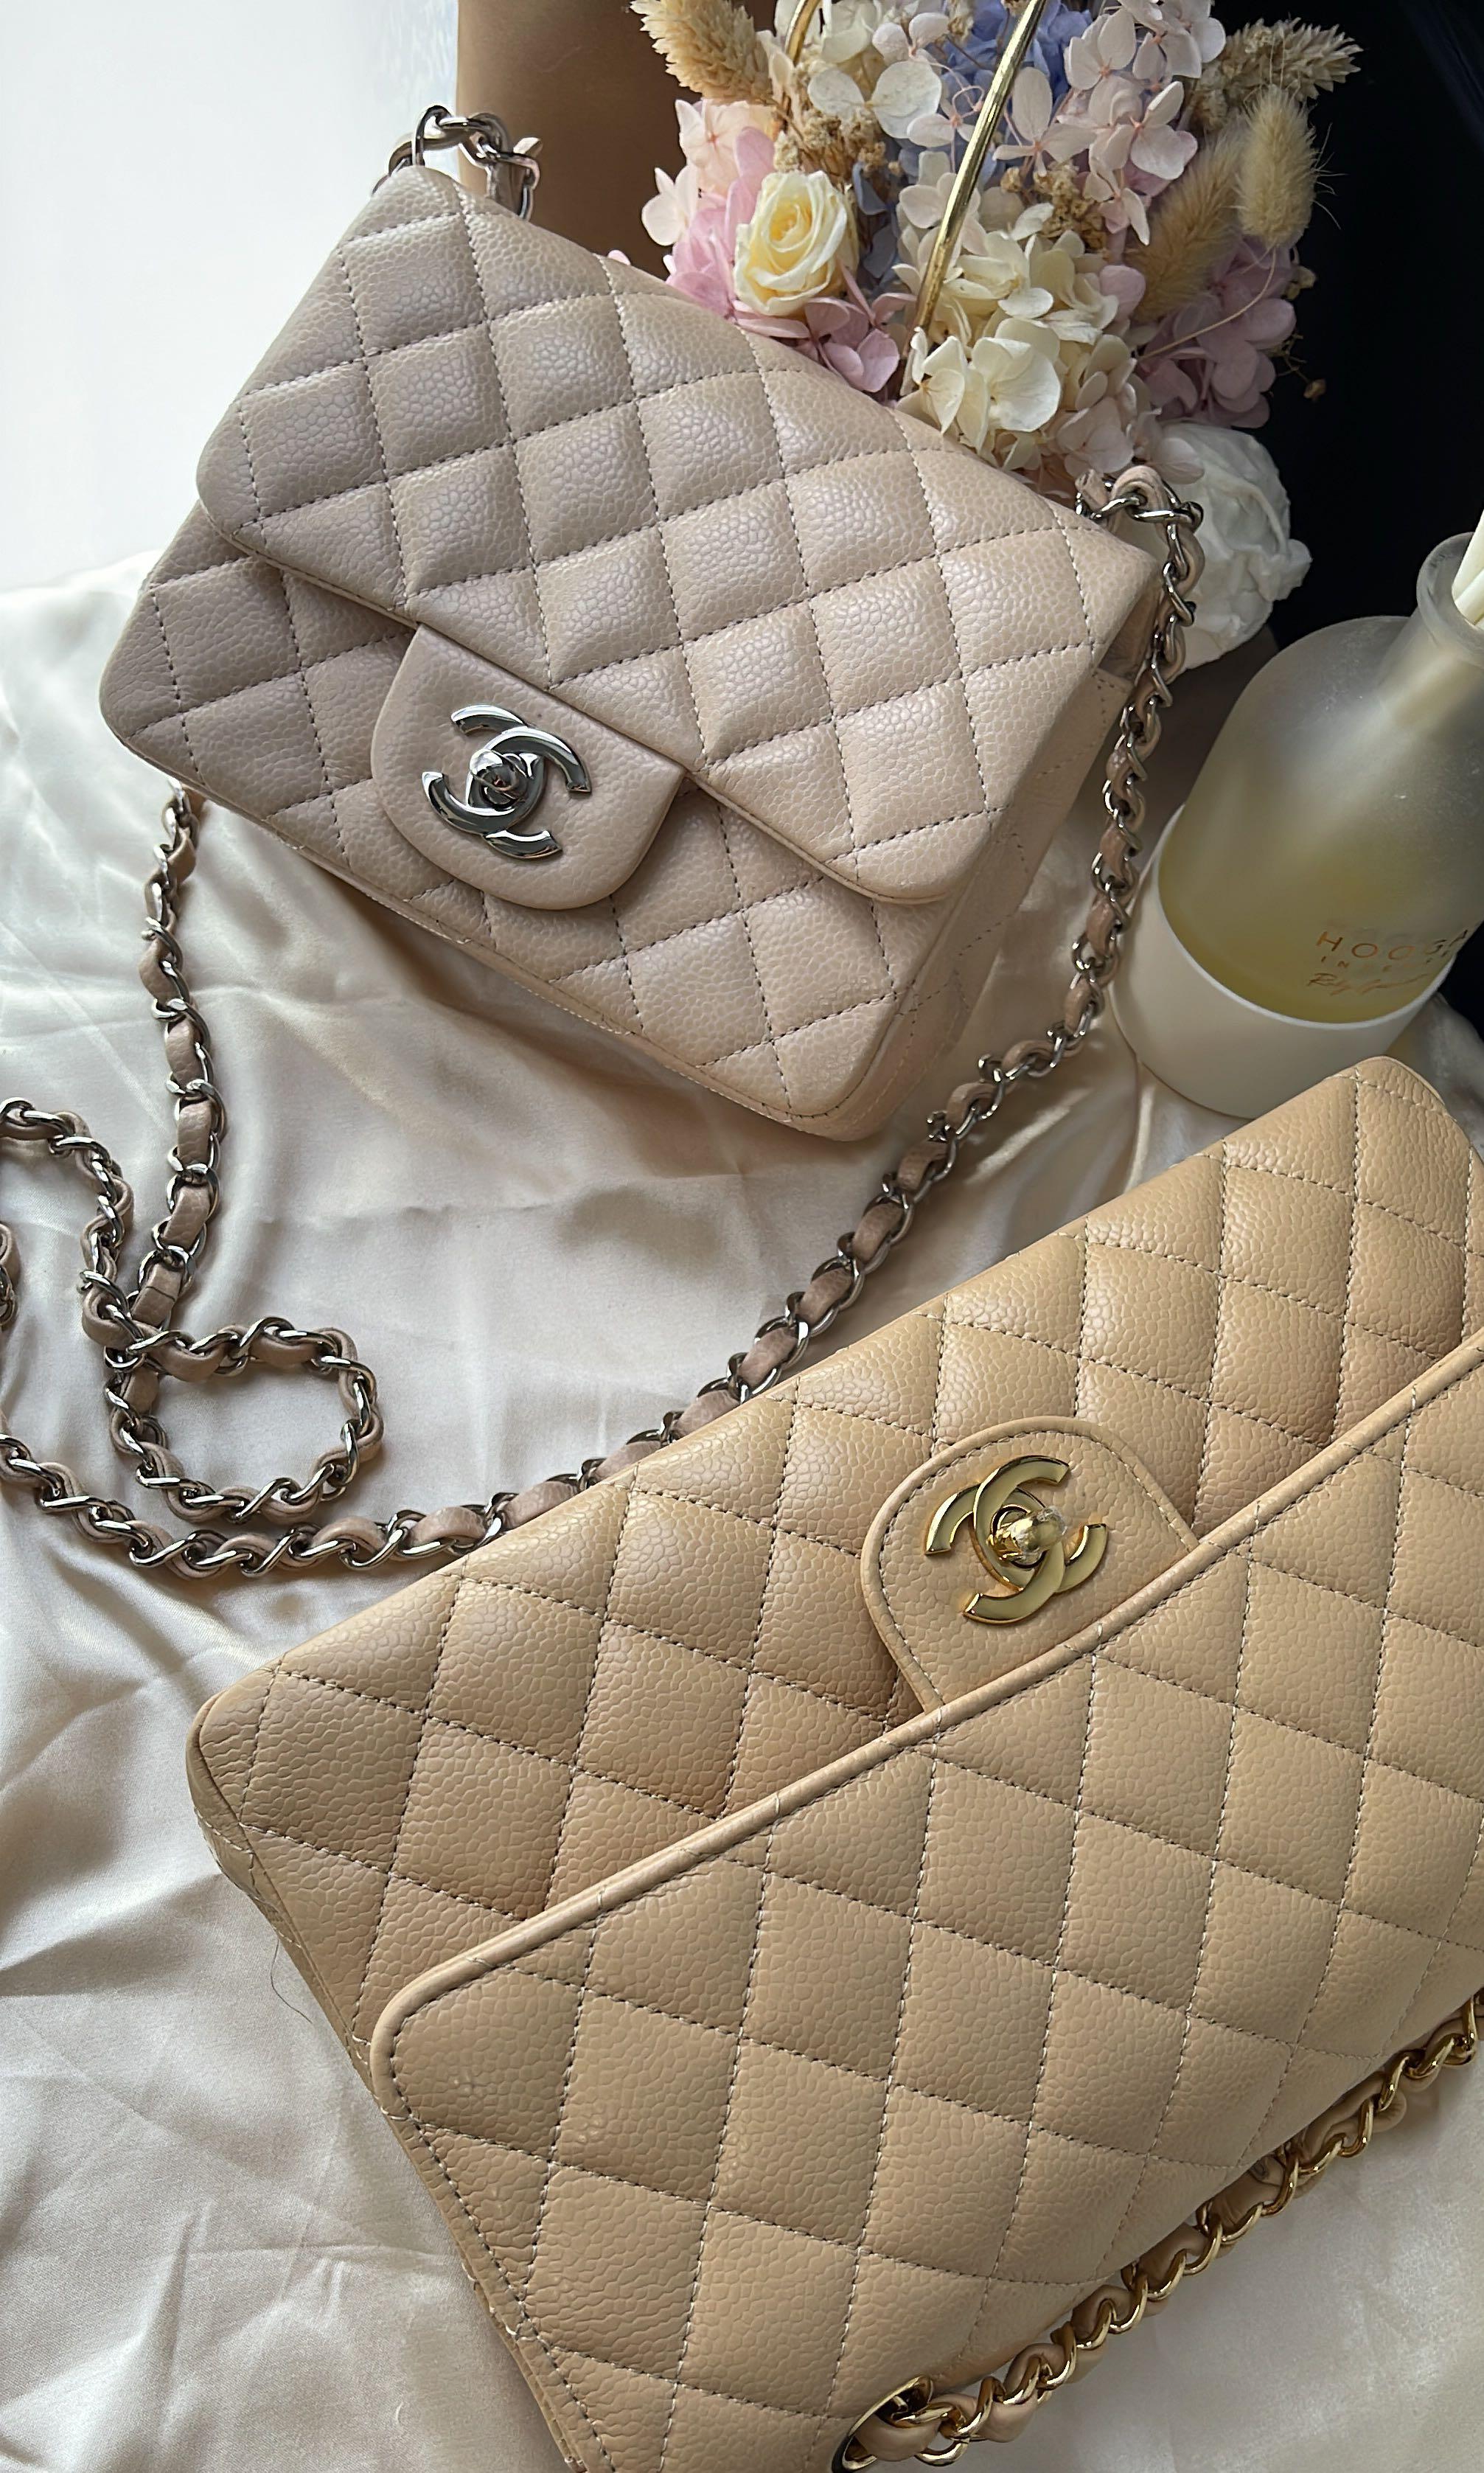 DEAL! 💕 Chanel Mini Square Caviar Nude Beige Clair with pinkish